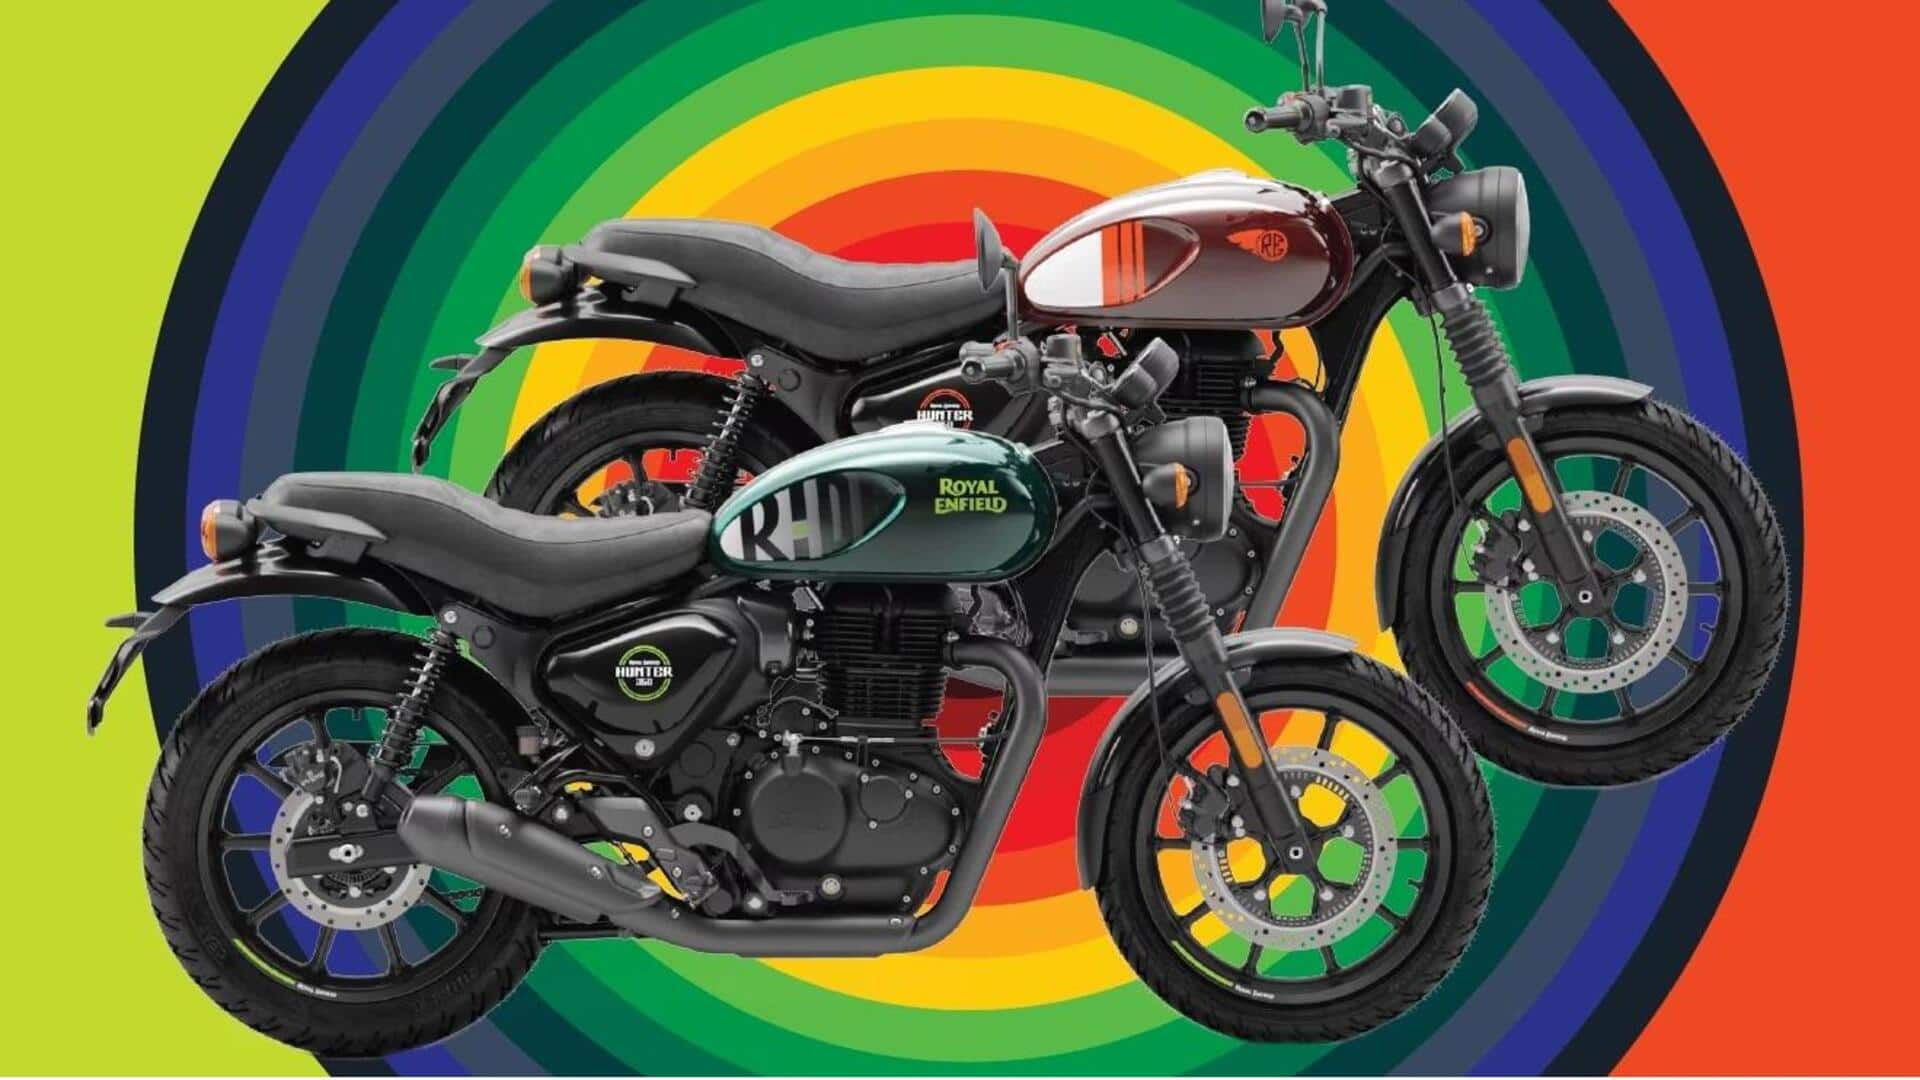 Royal Enfield Hunter 350 now available in two new colors